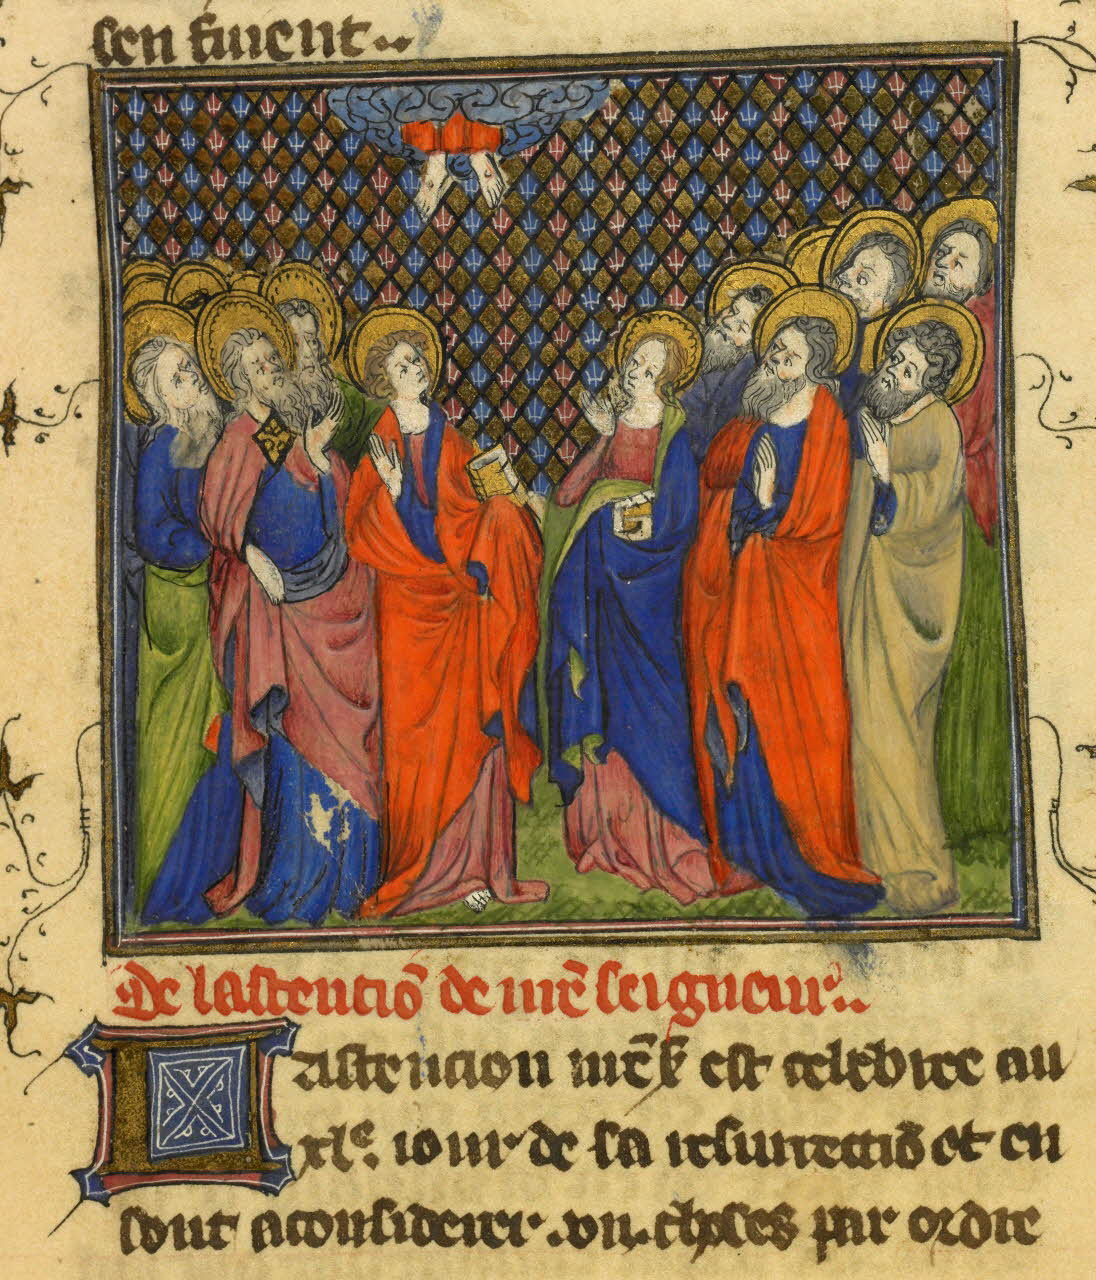 a medieval mcript shows an illustration of the adoration of christ